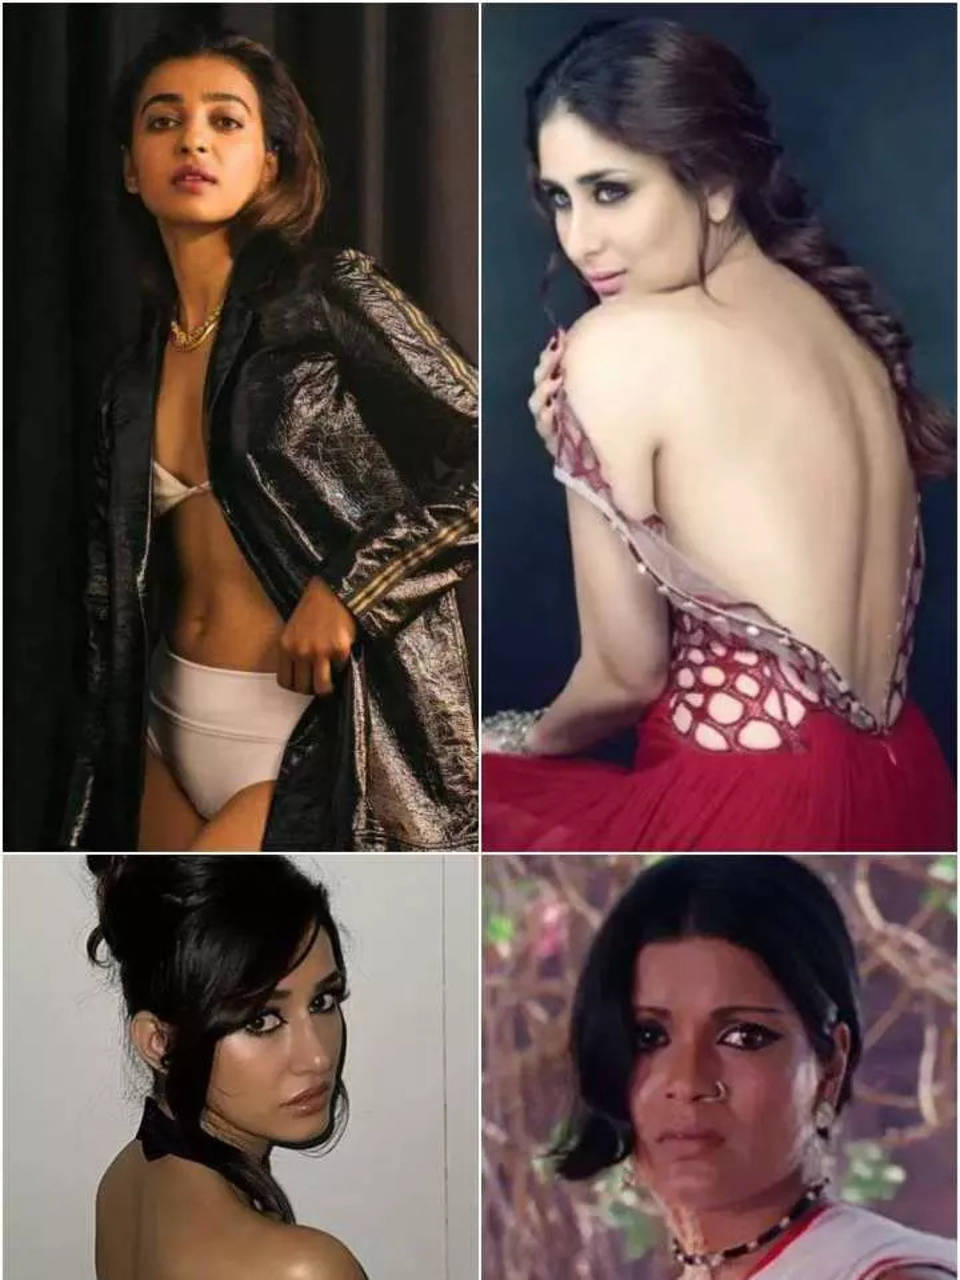 dhiren tailor add bollywood actress without cloth photo